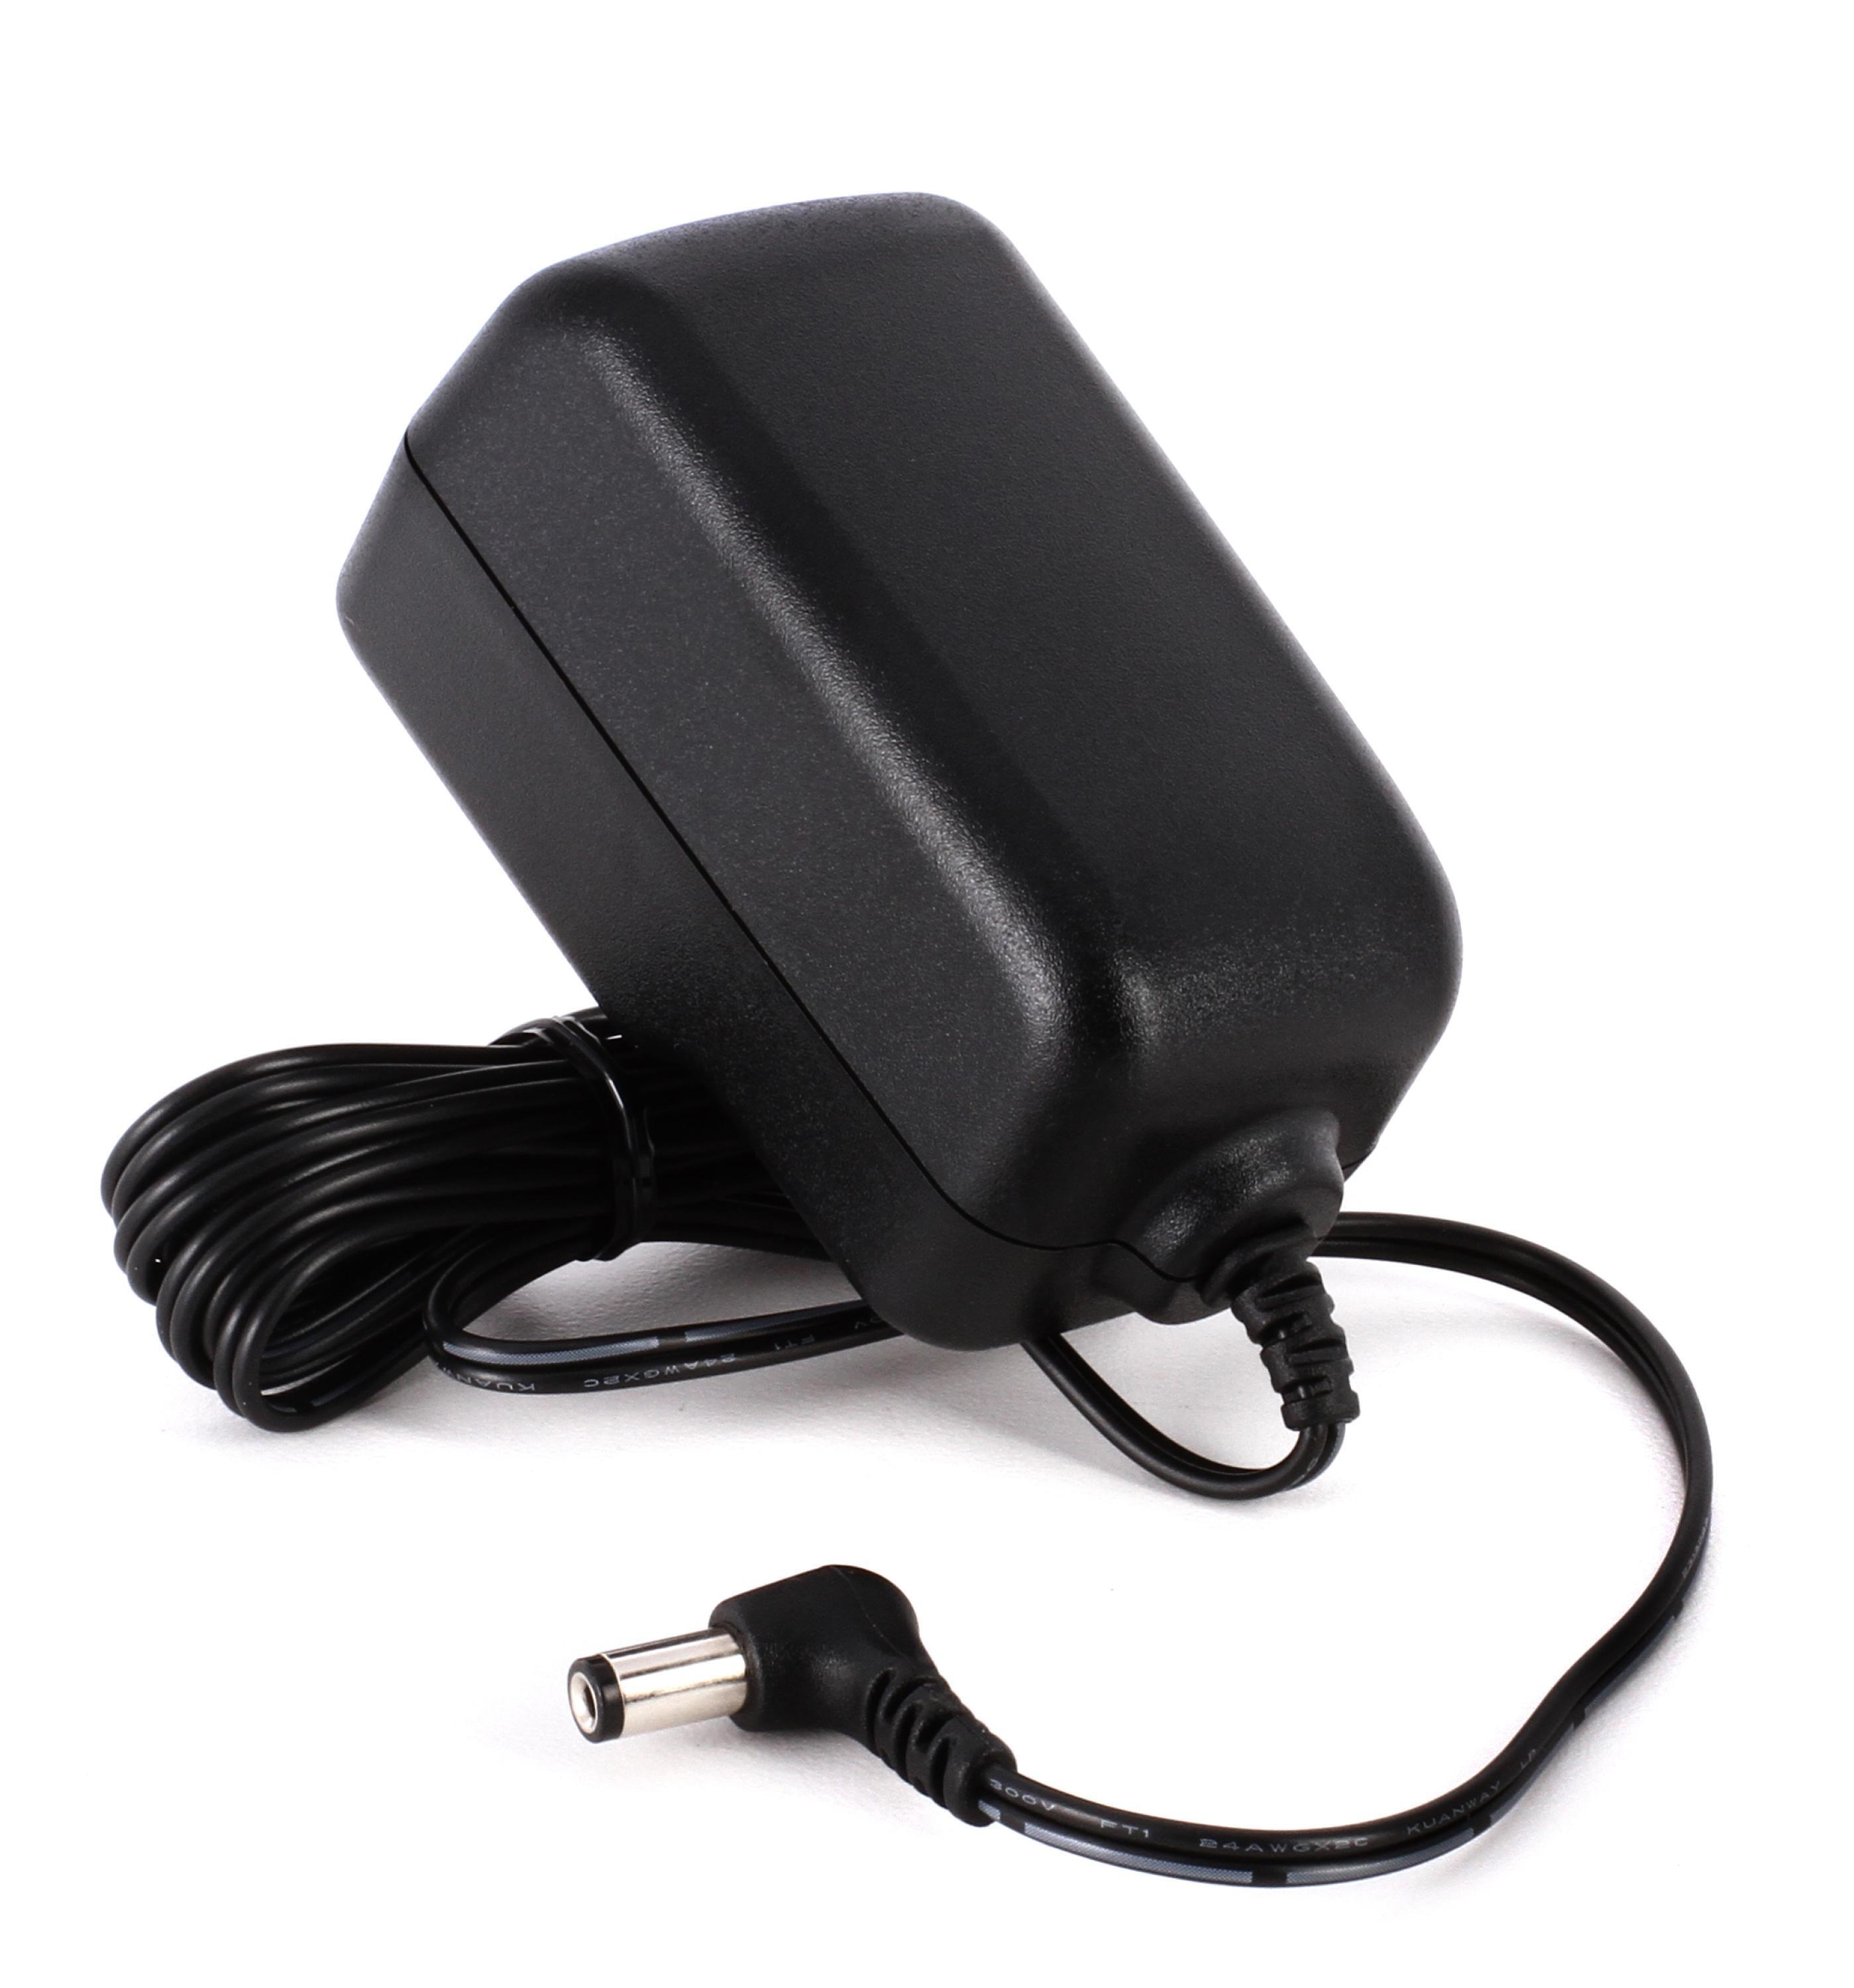 12V 500mA DC Power Supply AC Adapter with 2.1 x 5.5 mm Center Negative (-)  Plug